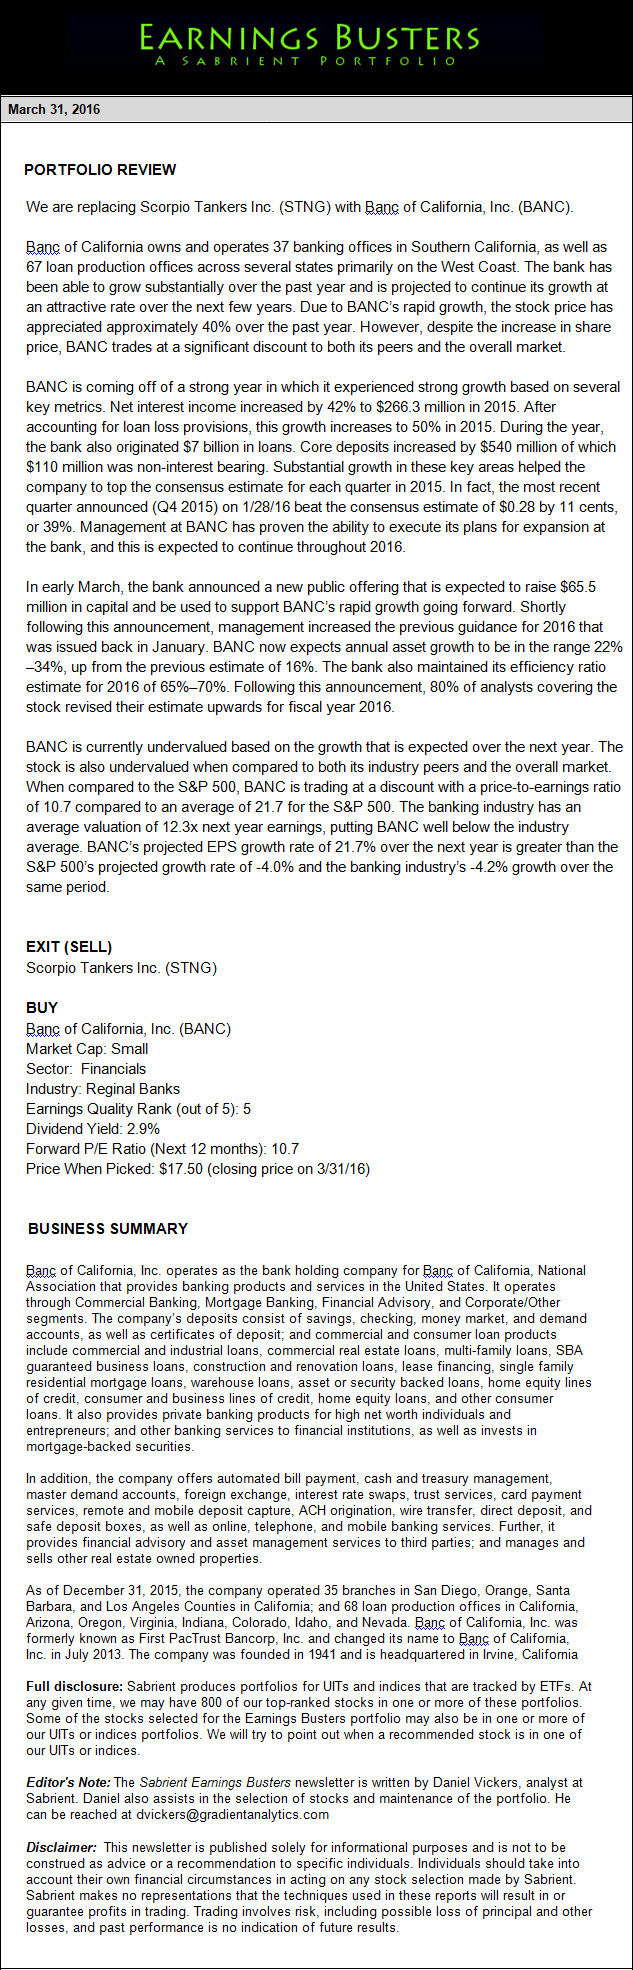 Earnings Busters Newsletter - March 31, 2016